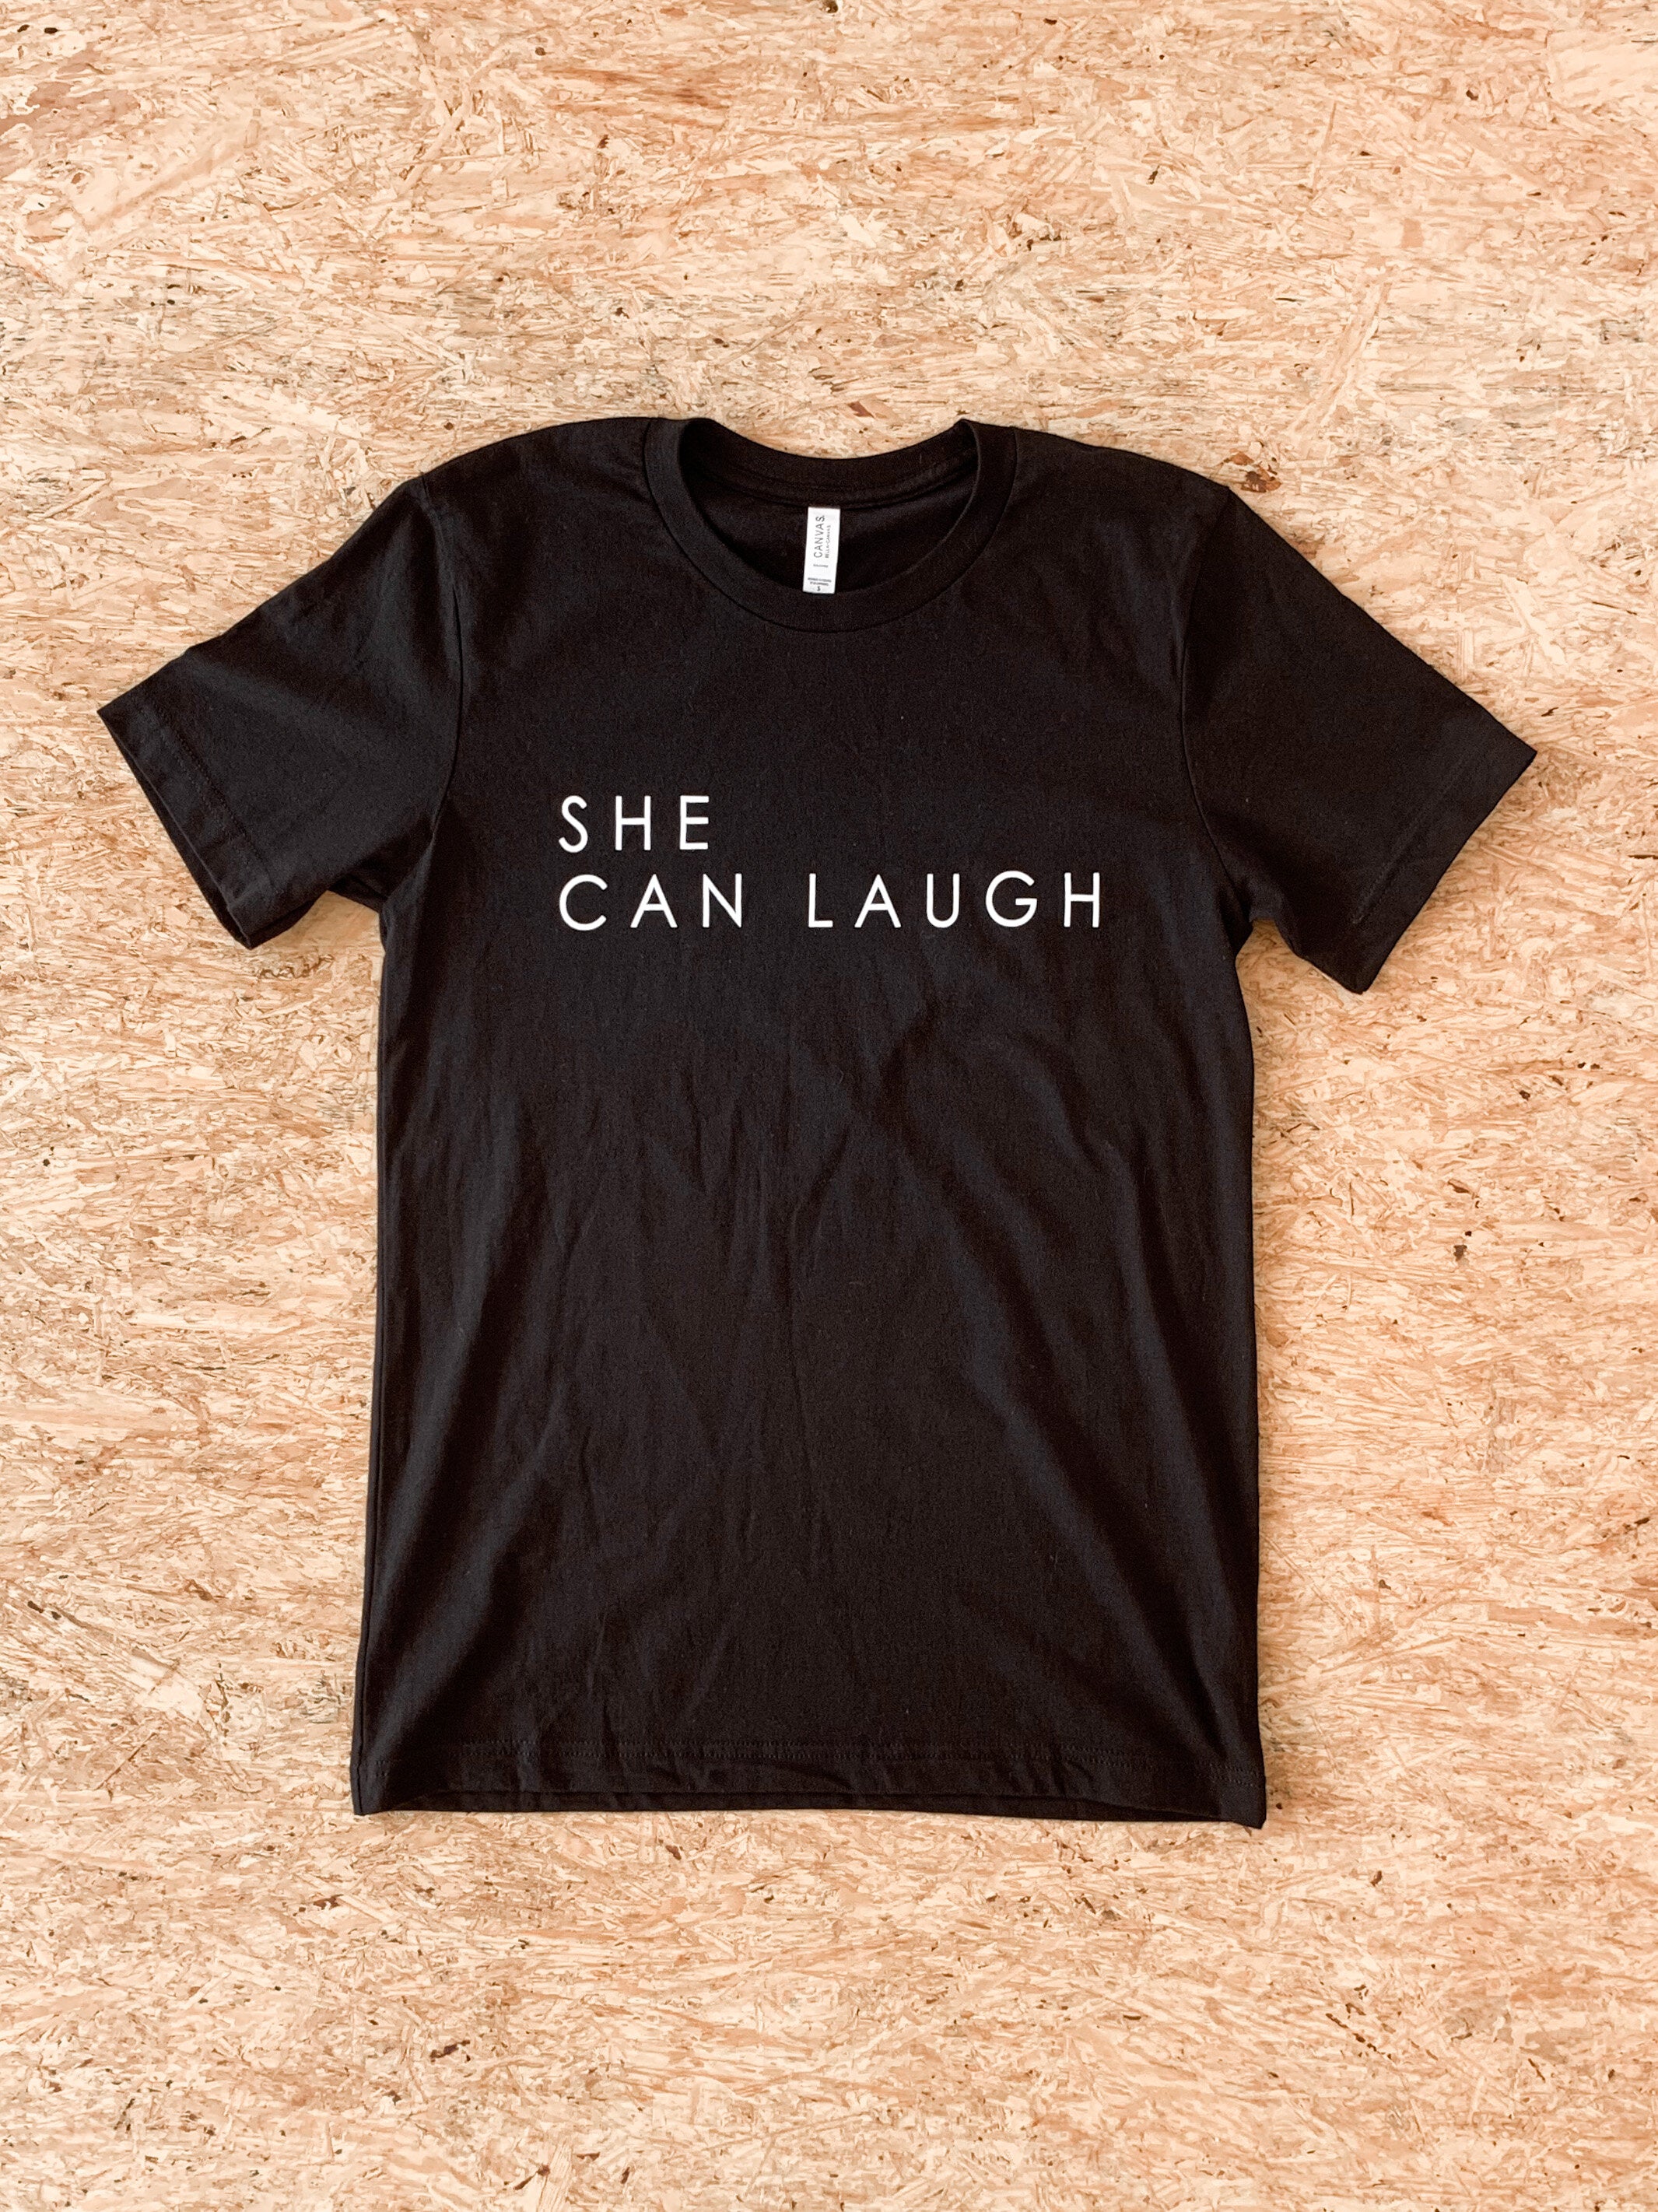 T-Shirt - She Can Laugh - Black - Century Gothic